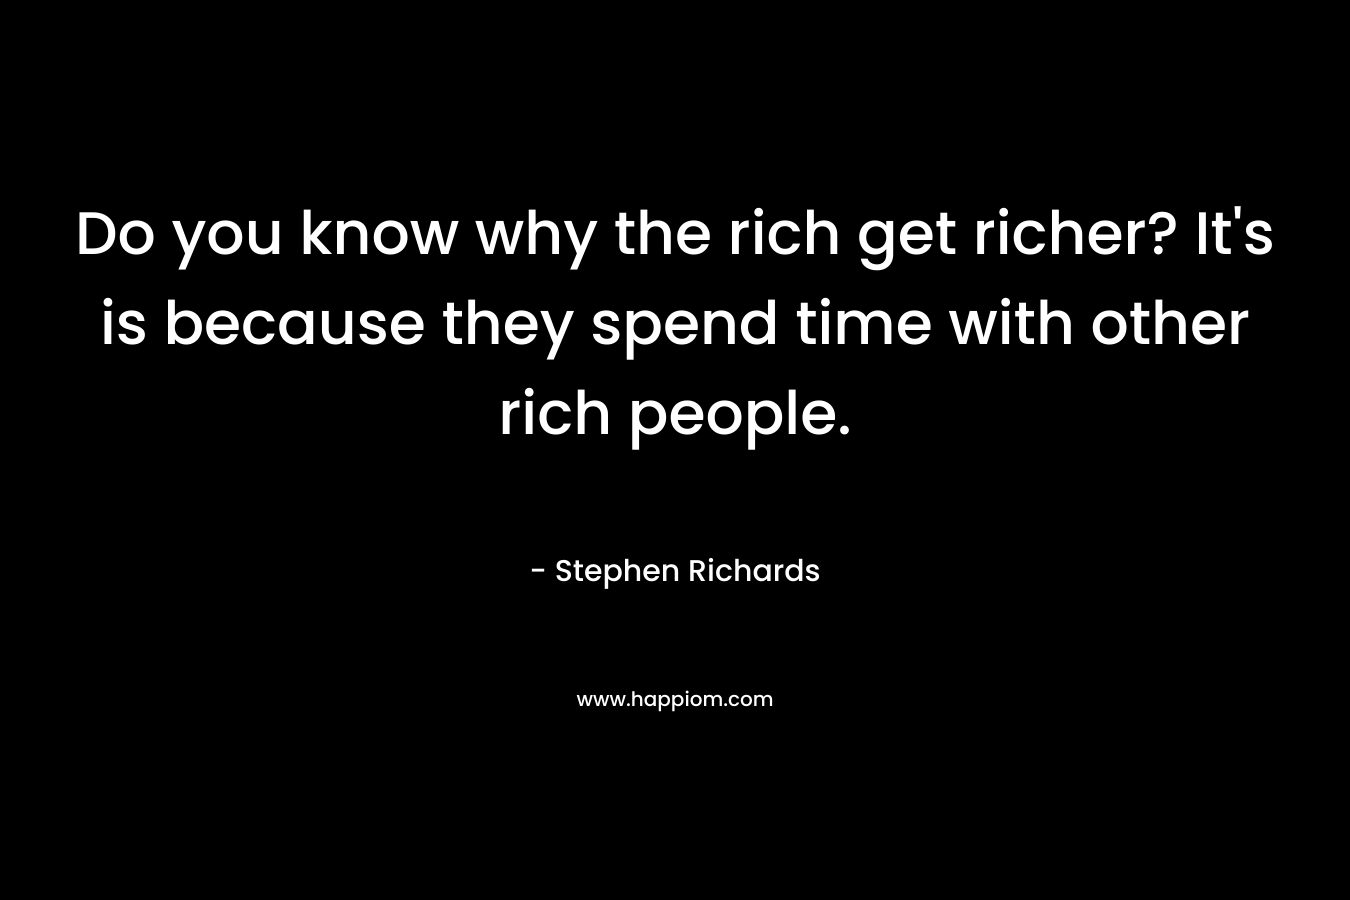 Do you know why the rich get richer? It's is because they spend time with other rich people.